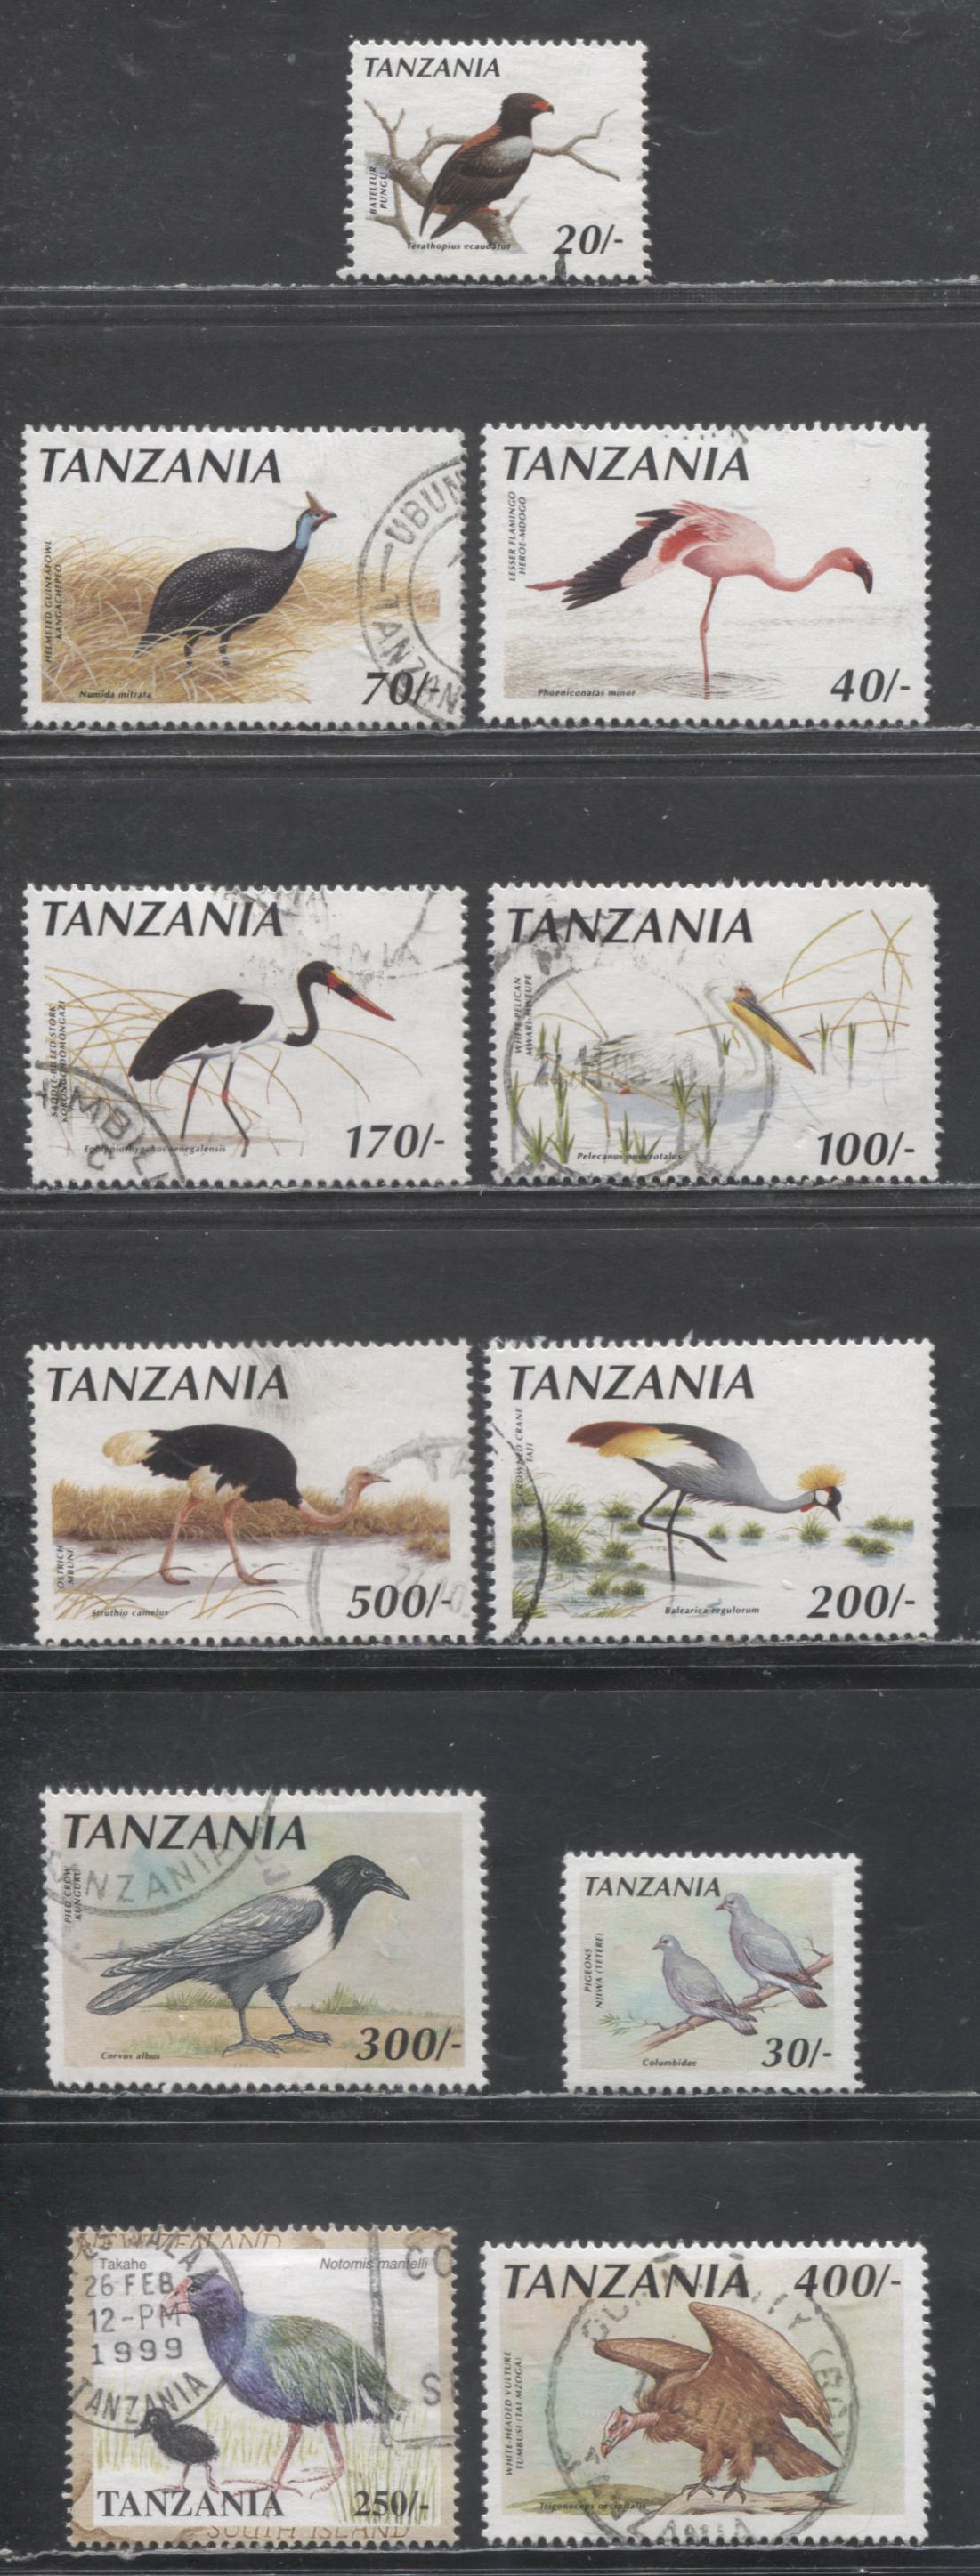 Lot 13 Tanzania SC#610/711 1990-1998 Bird Definitives & Flora & Fauna Issues, 11 Fine/Very Fine Used Singles, Click on Listing to See ALL Pictures, 2017 Scott Cat. $19.85